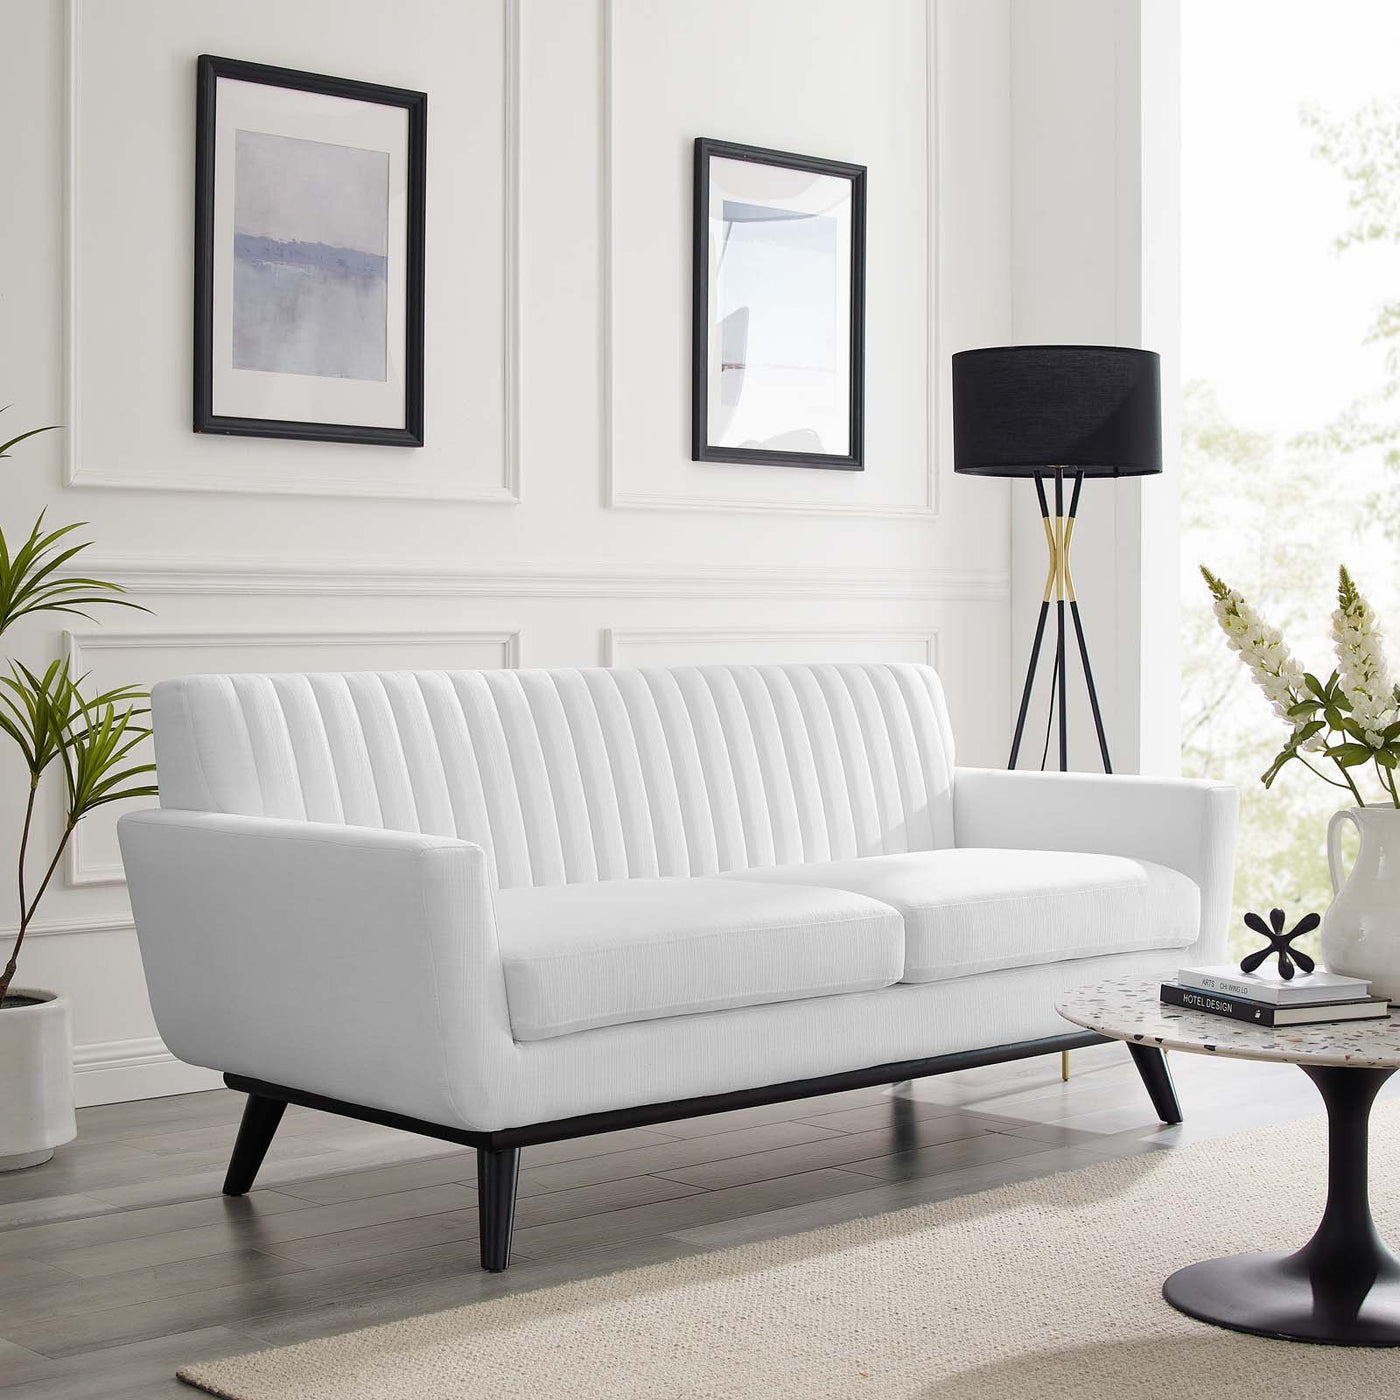 Engage Channel Tufted Fabric Loveseat